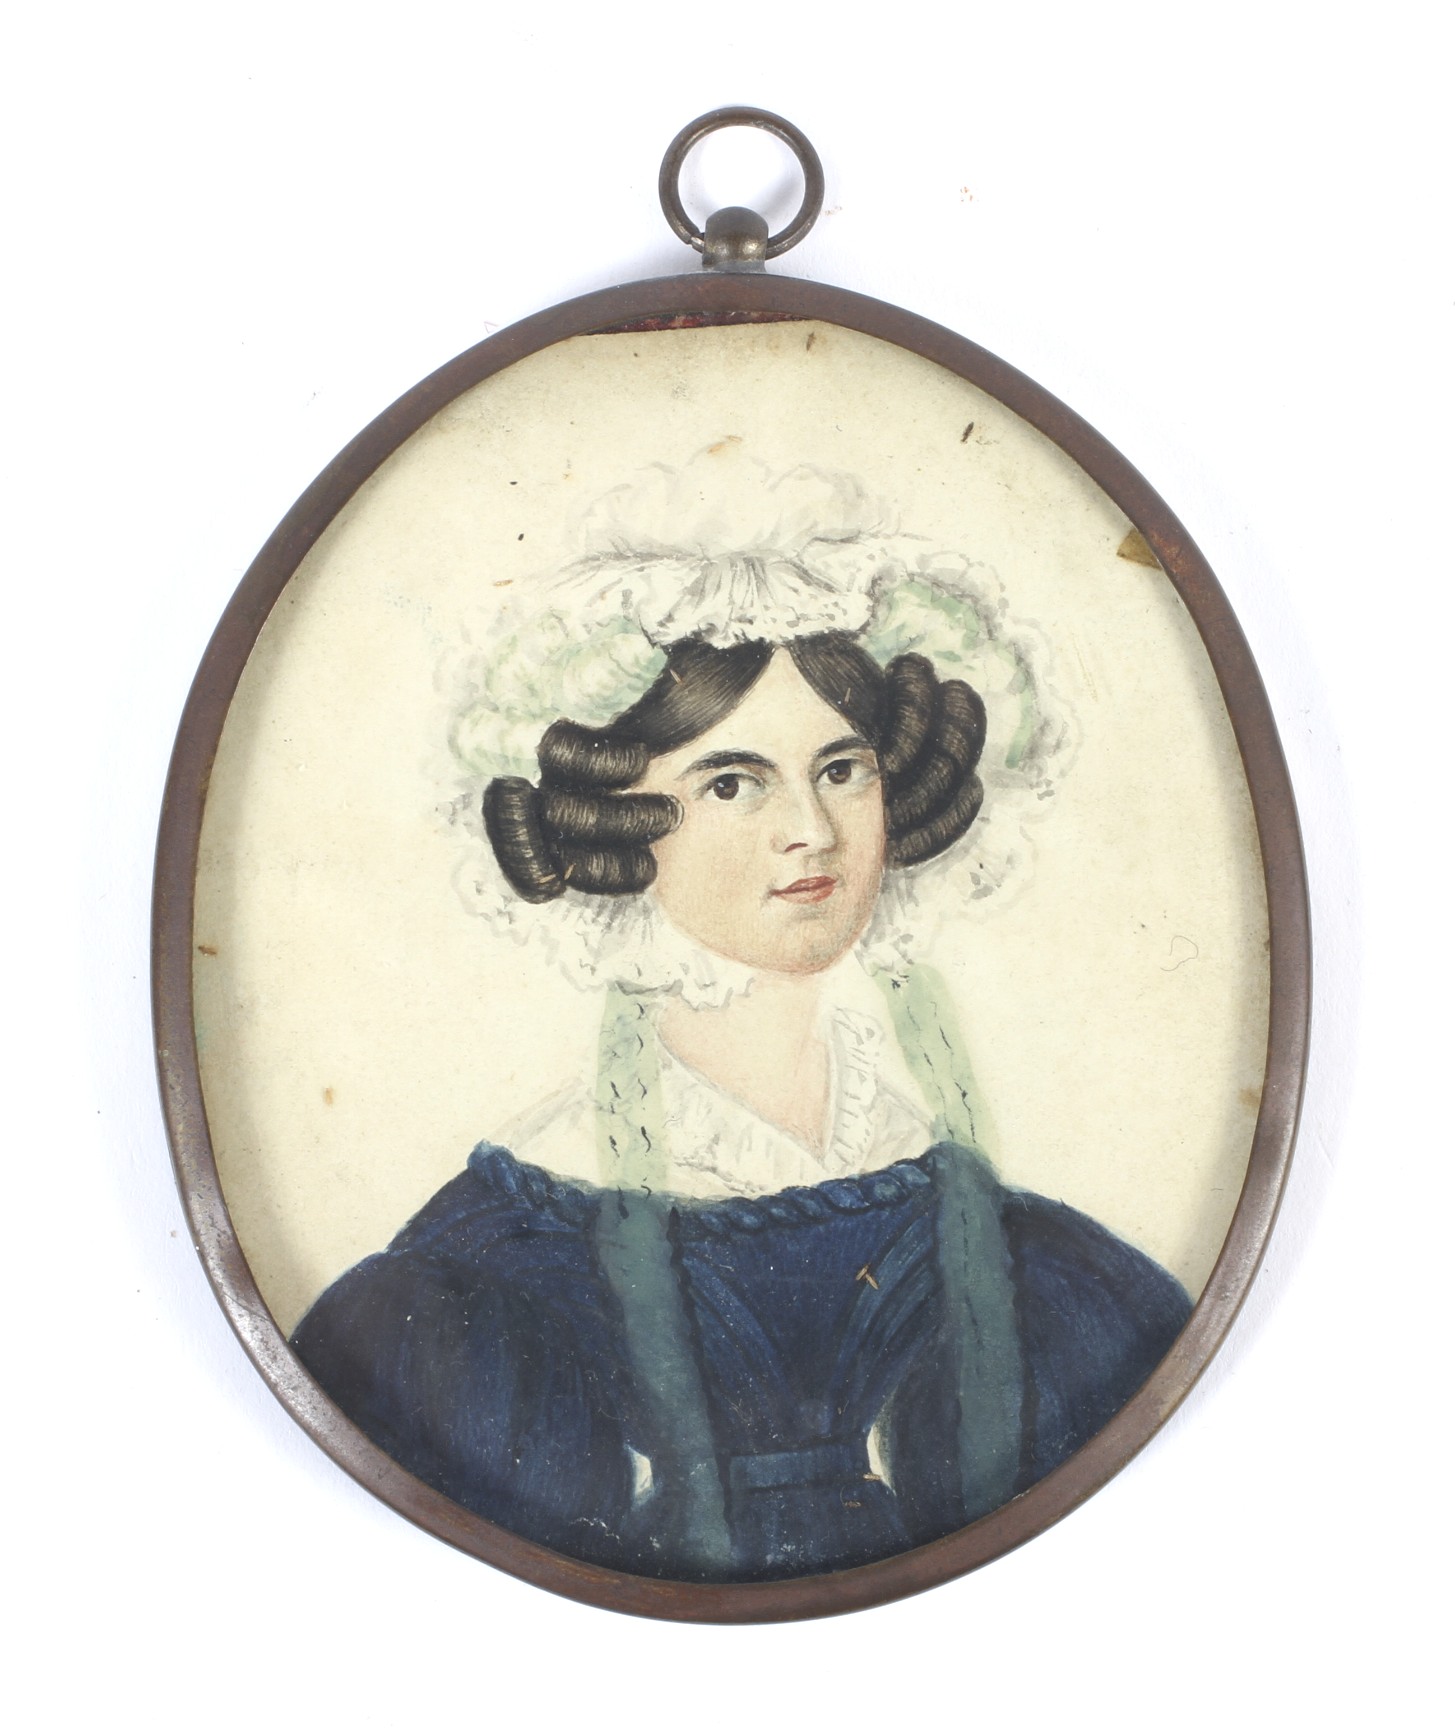 An early 19th century portrait miniature of a lady.